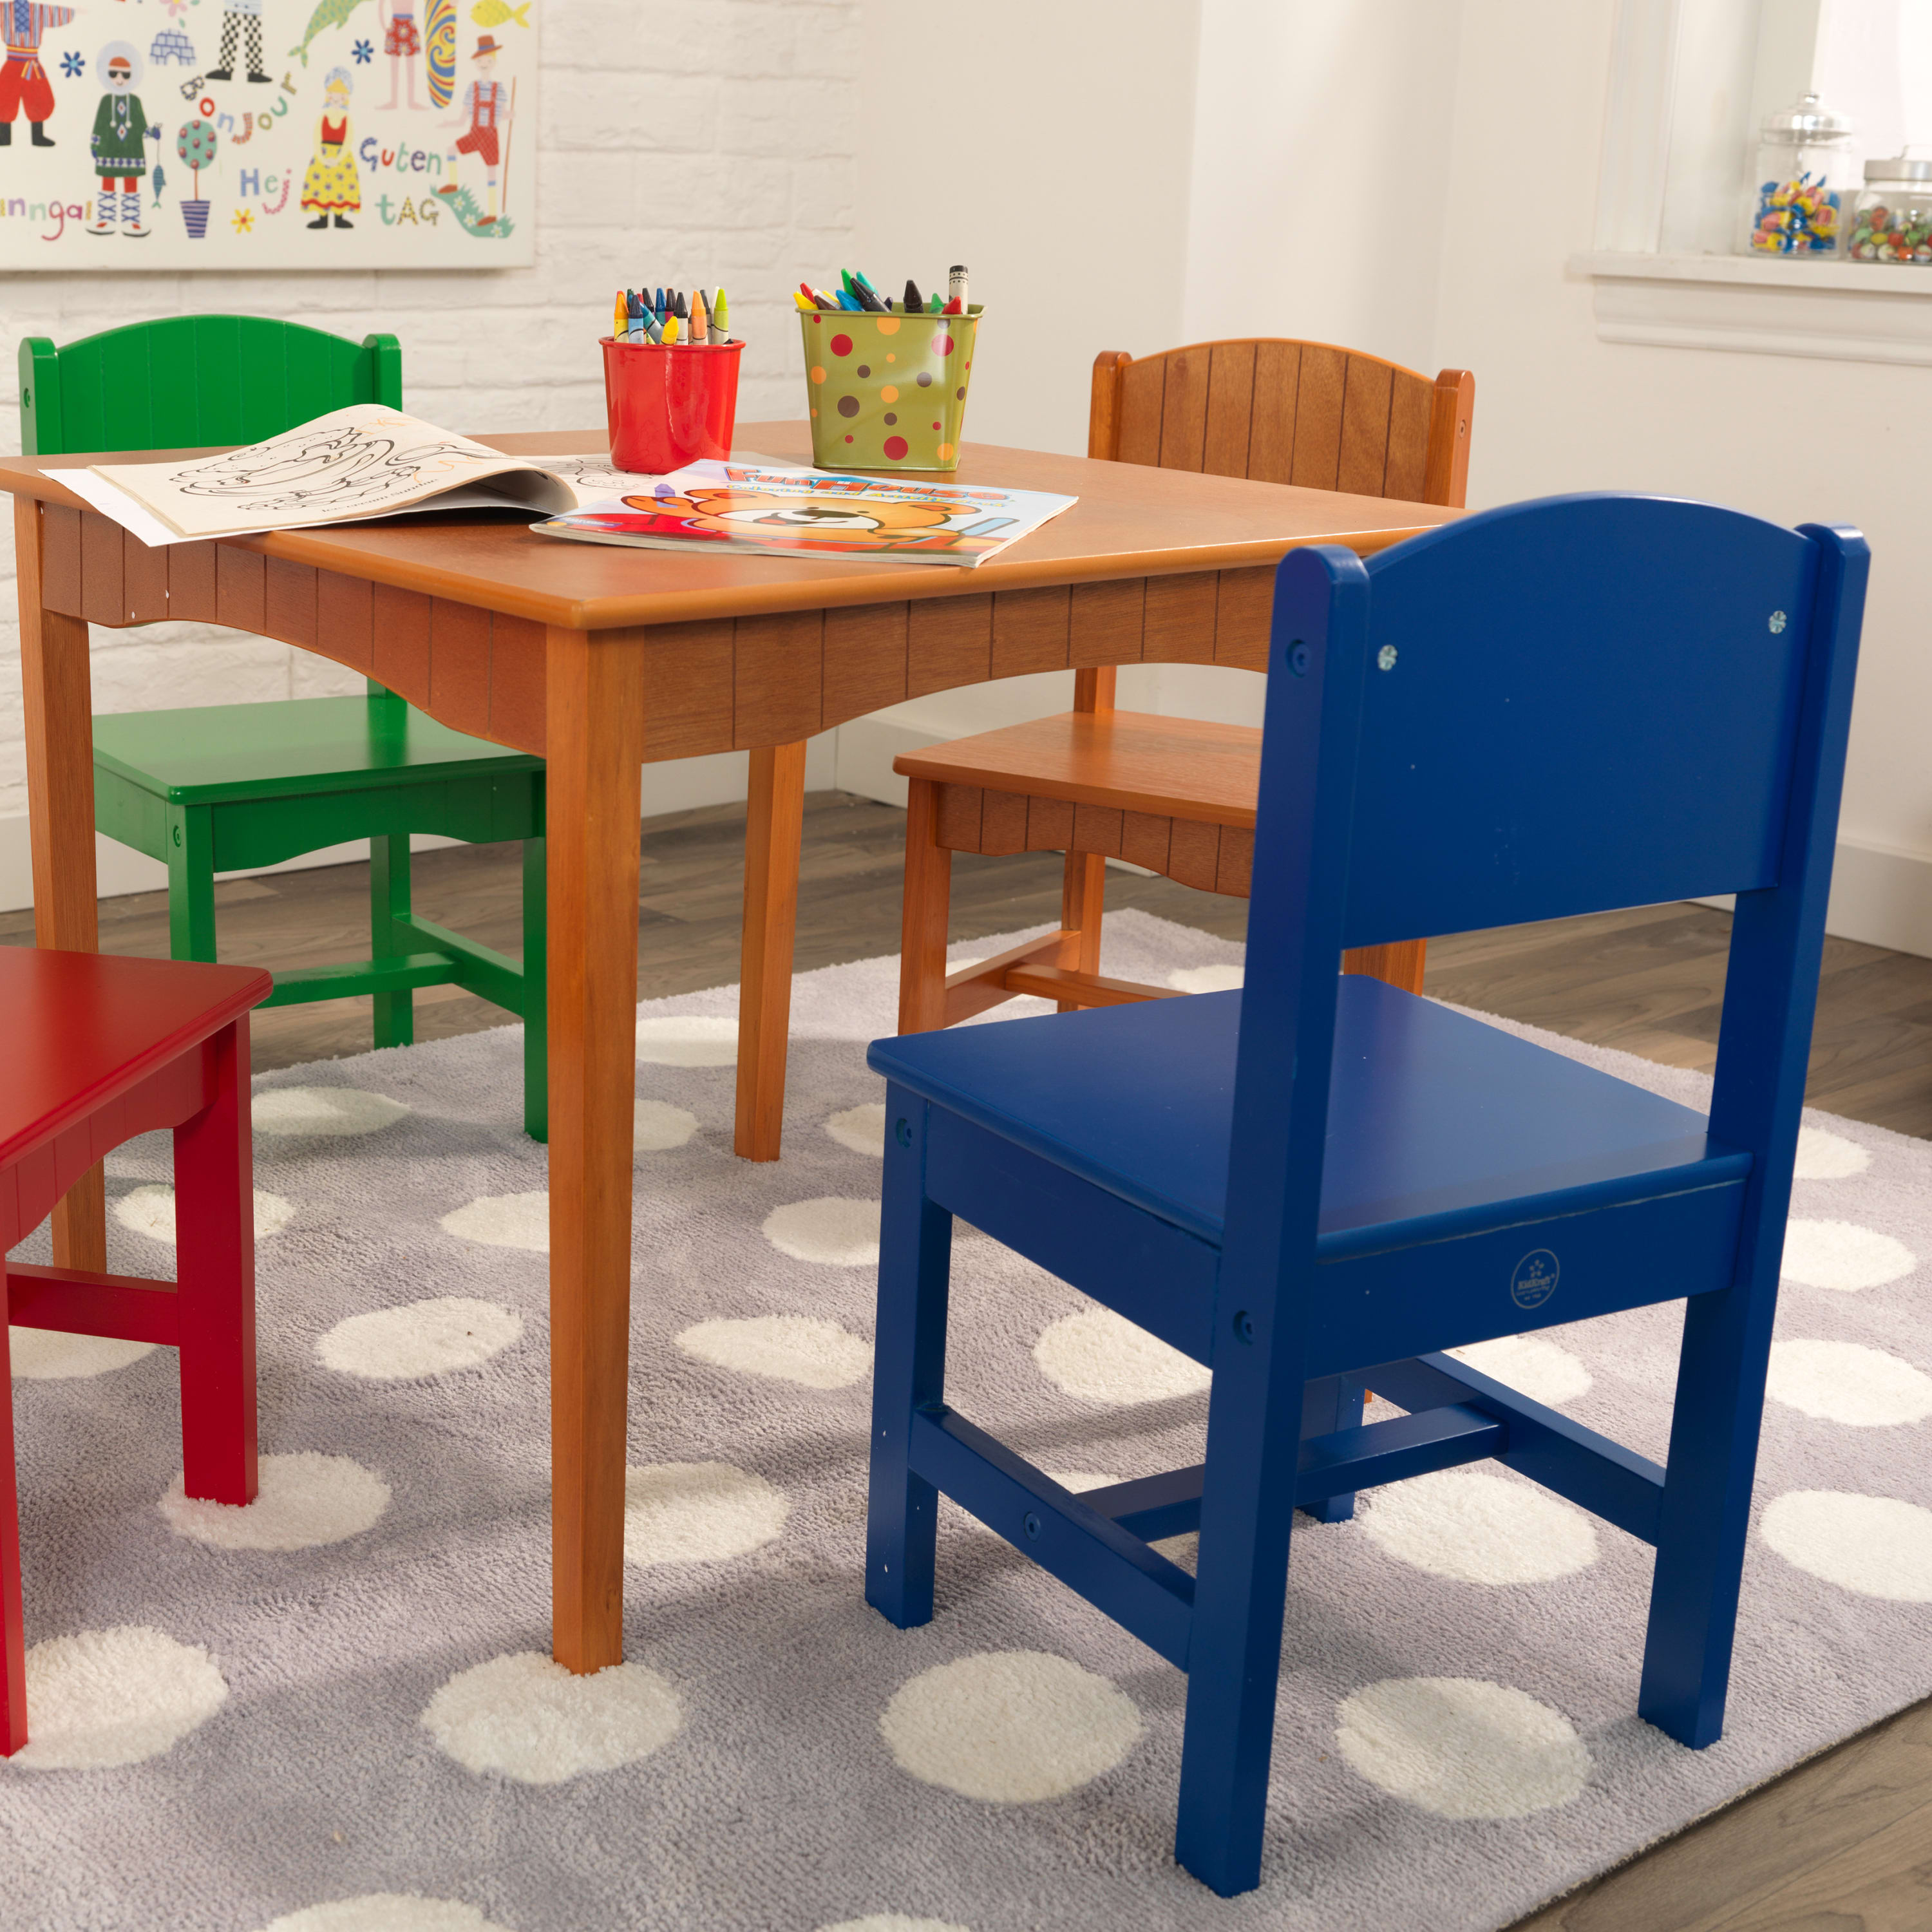 KidKraft Nantucket Wooden Table & 4 Chair Set, Primary Colors - image 4 of 7